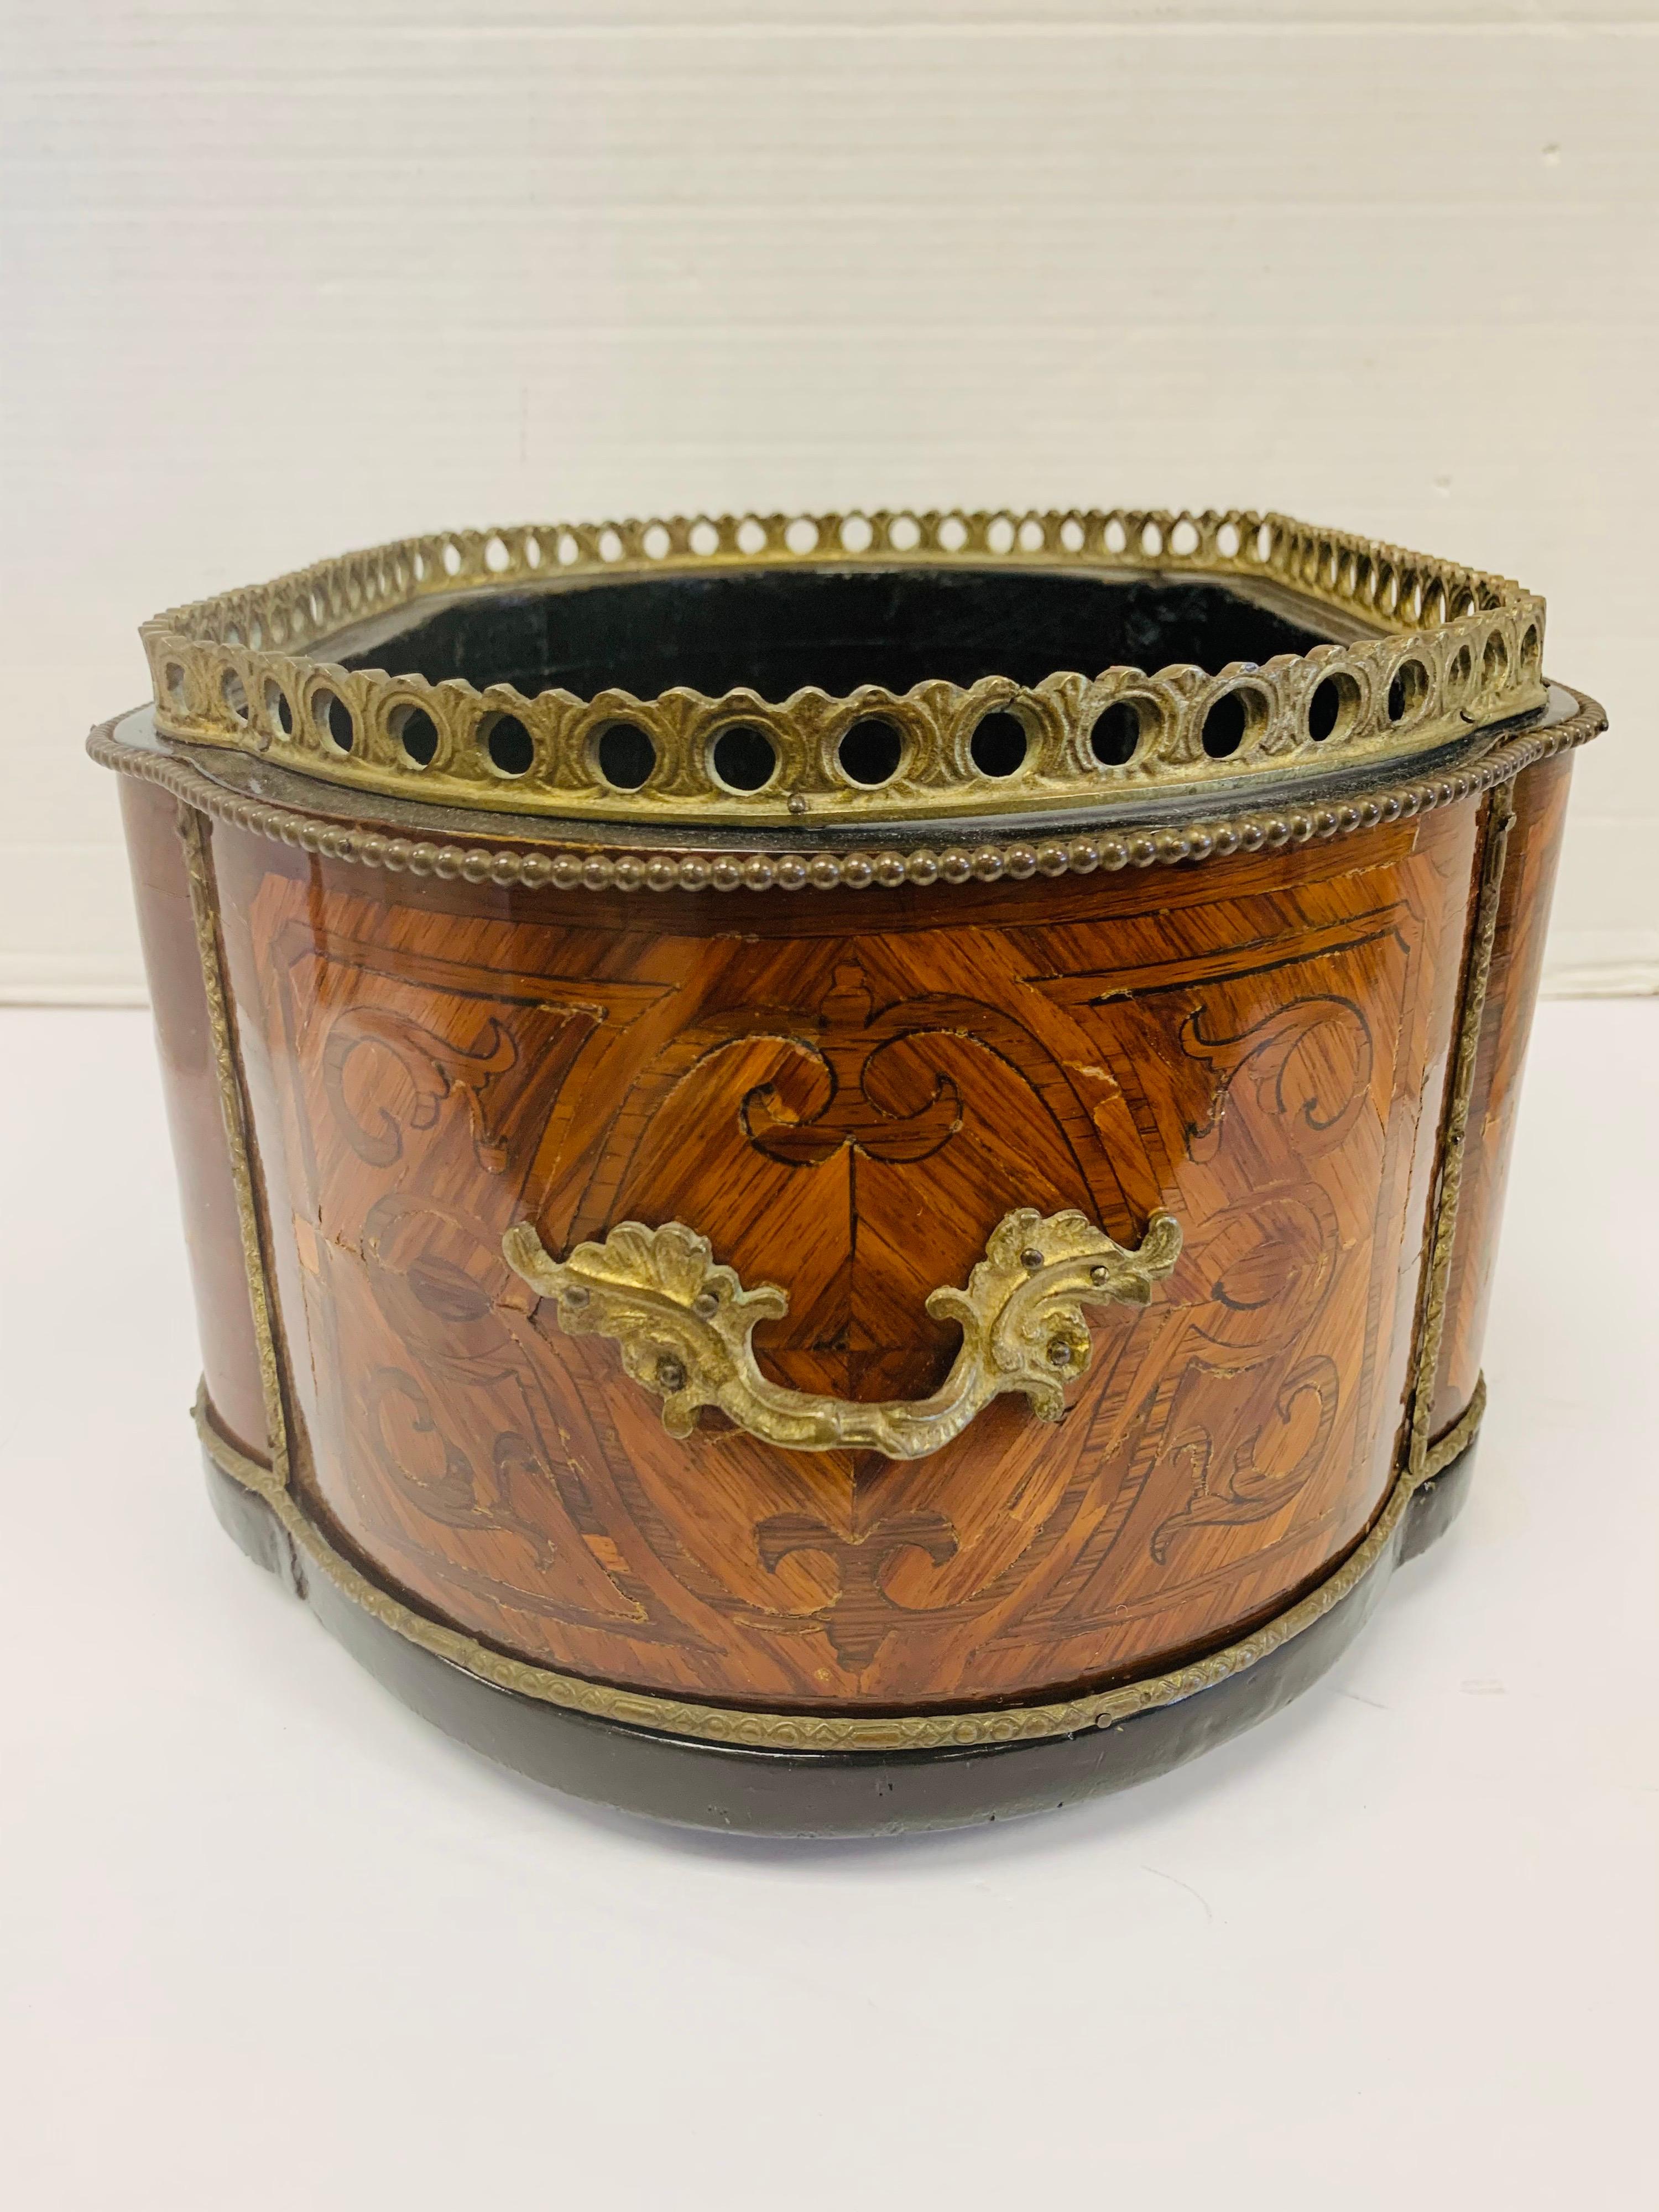 Exquisite mahogany and satinwood jardiniere with pierced brass gallery and beaded edge. Brass carrying handles on each side. Raised on bum feet.